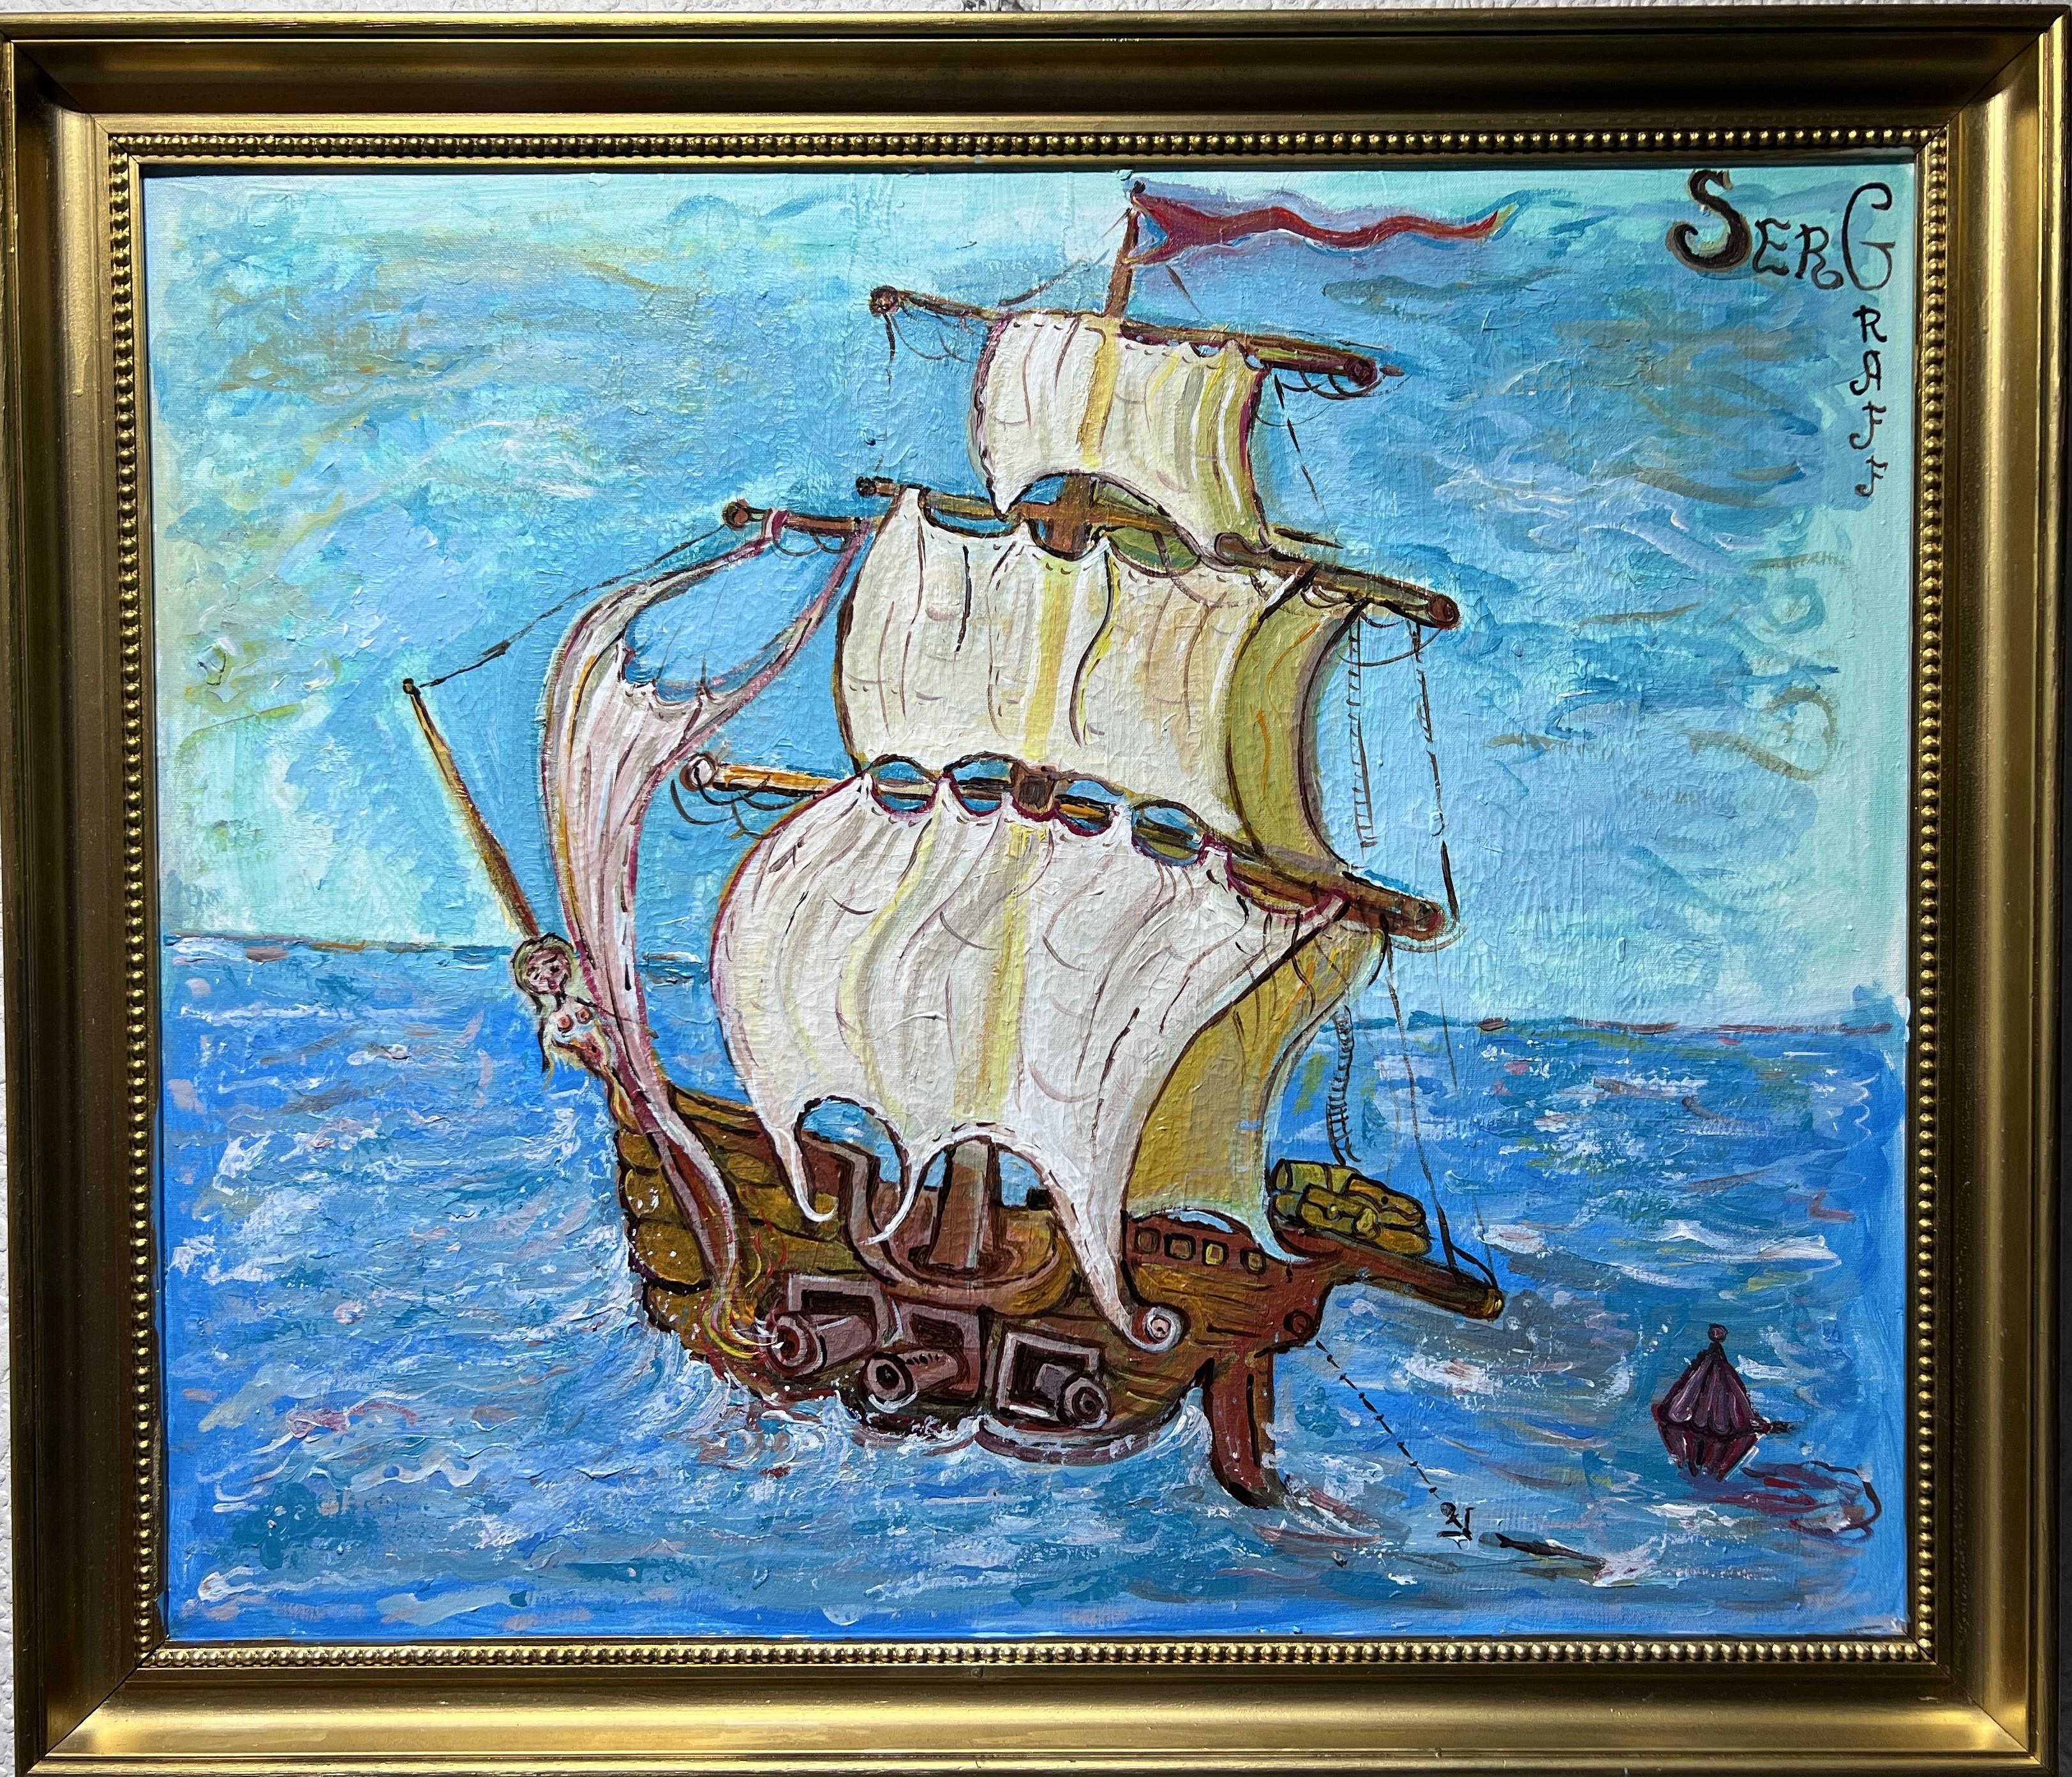 The ship itself is detailed with intricate lines and shading, highlighting the structure of the masts, the sails, and the hull. The use of bold colors, particularly the red accents on the ship and the white and beige of the sails, draws the viewer's